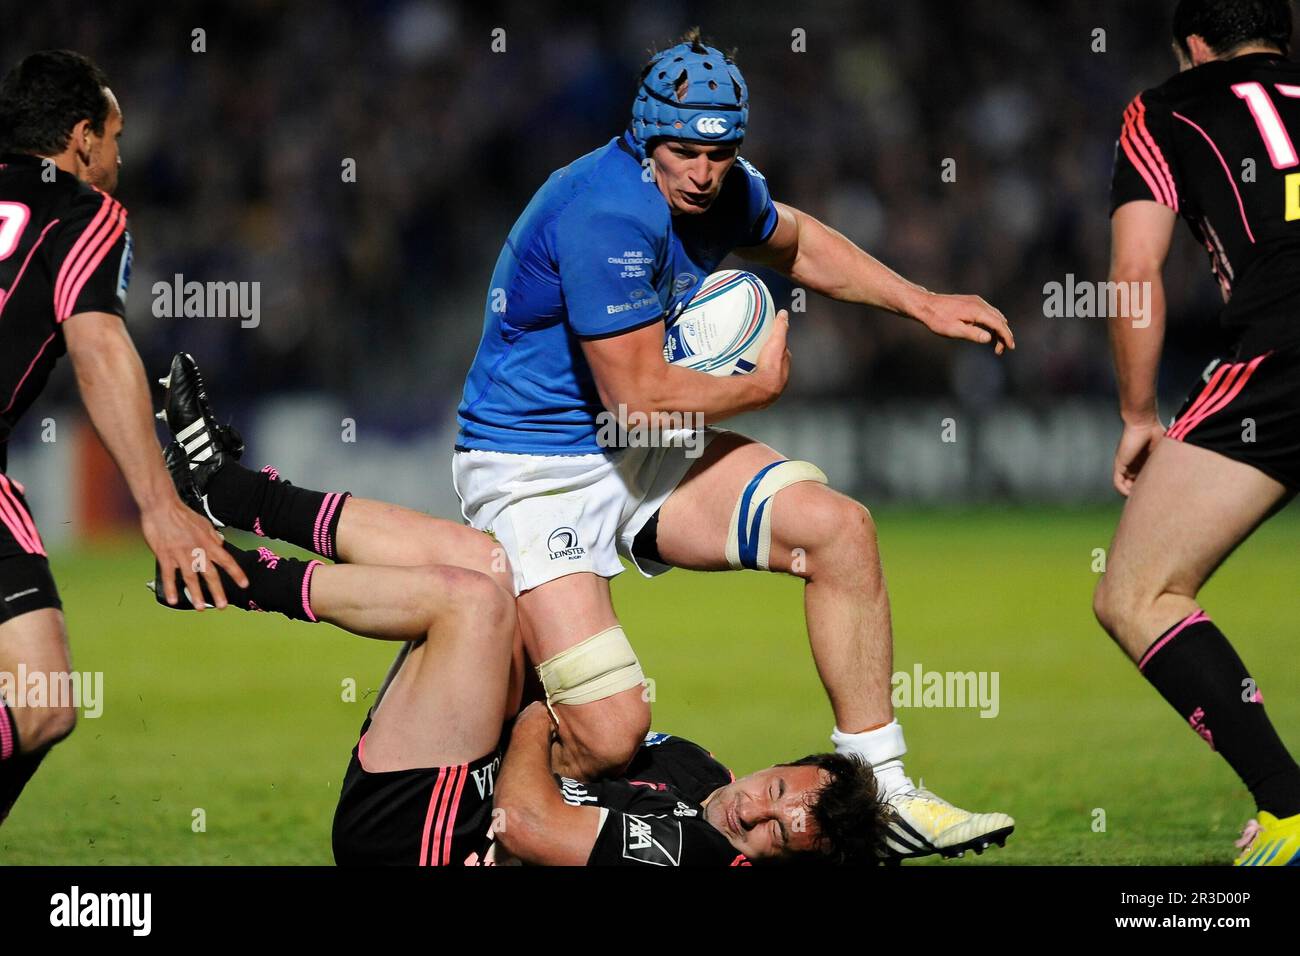 Rhys Ruddock of Leinster charges through Jérémy Sinzelle of Stade Francais during the Amlin Challenge Cup Final between Leinster Rugby and Stade Franc Stock Photo